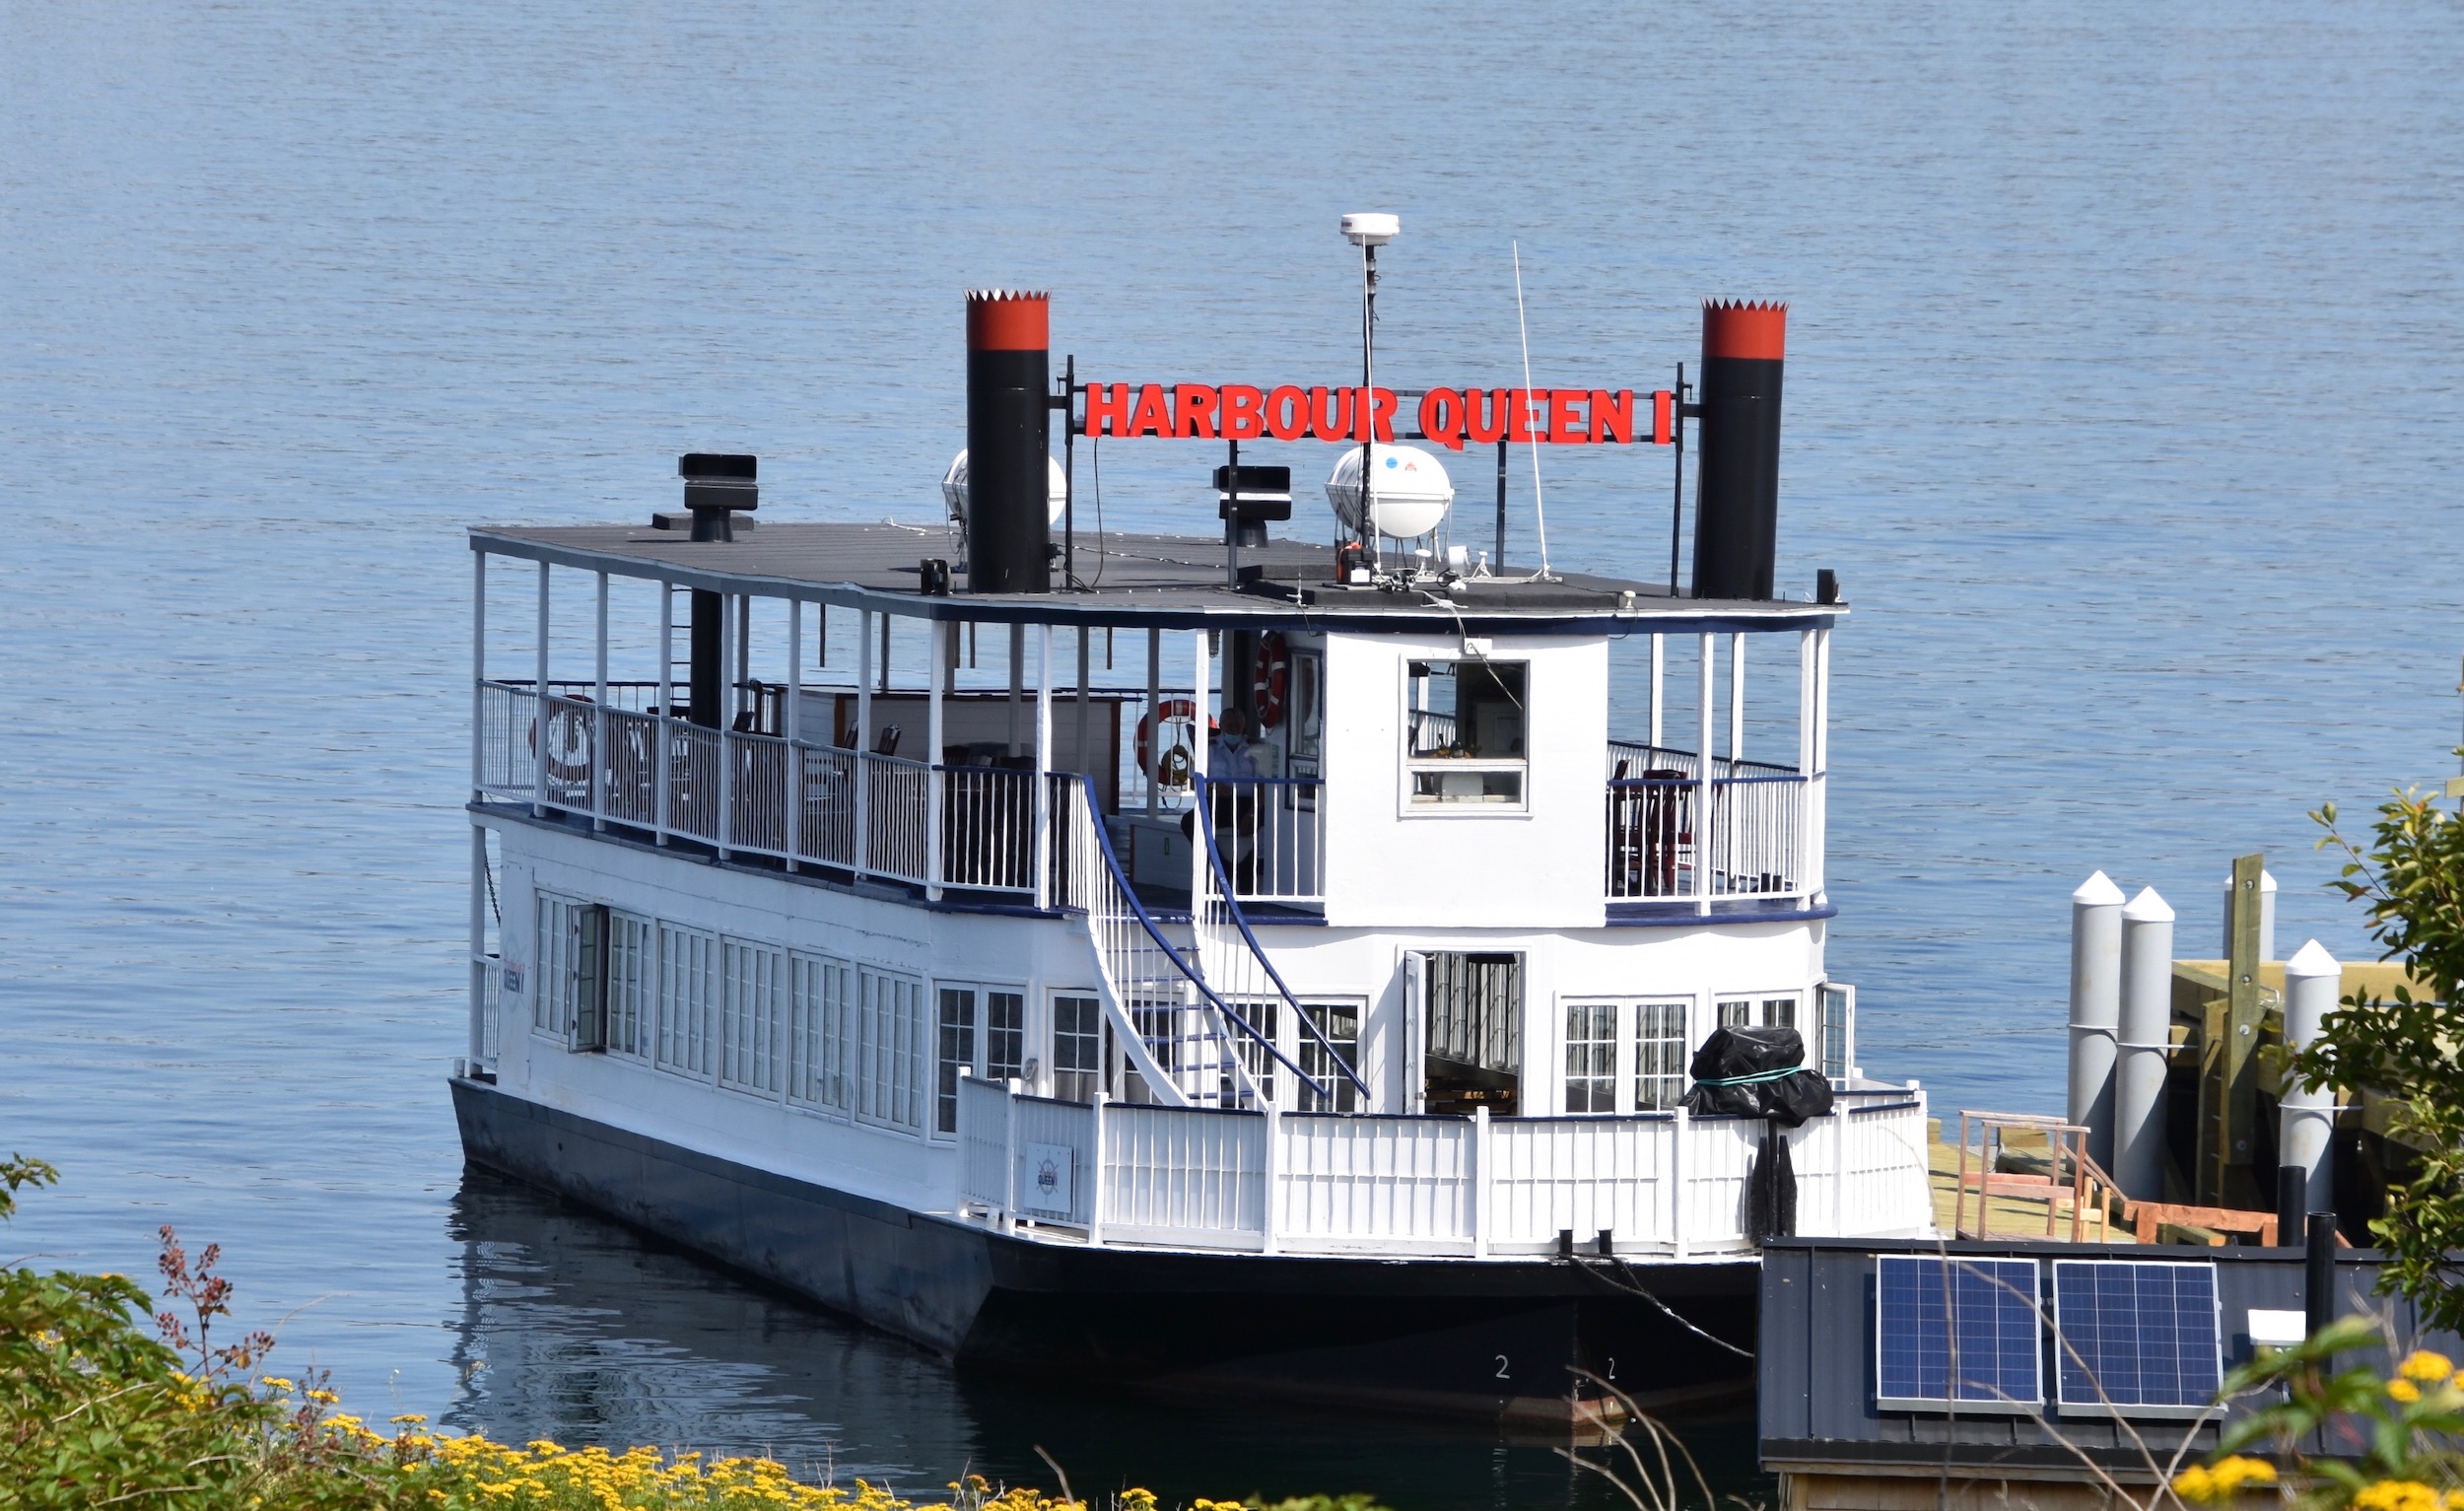 Harbour Queen on Georges Island